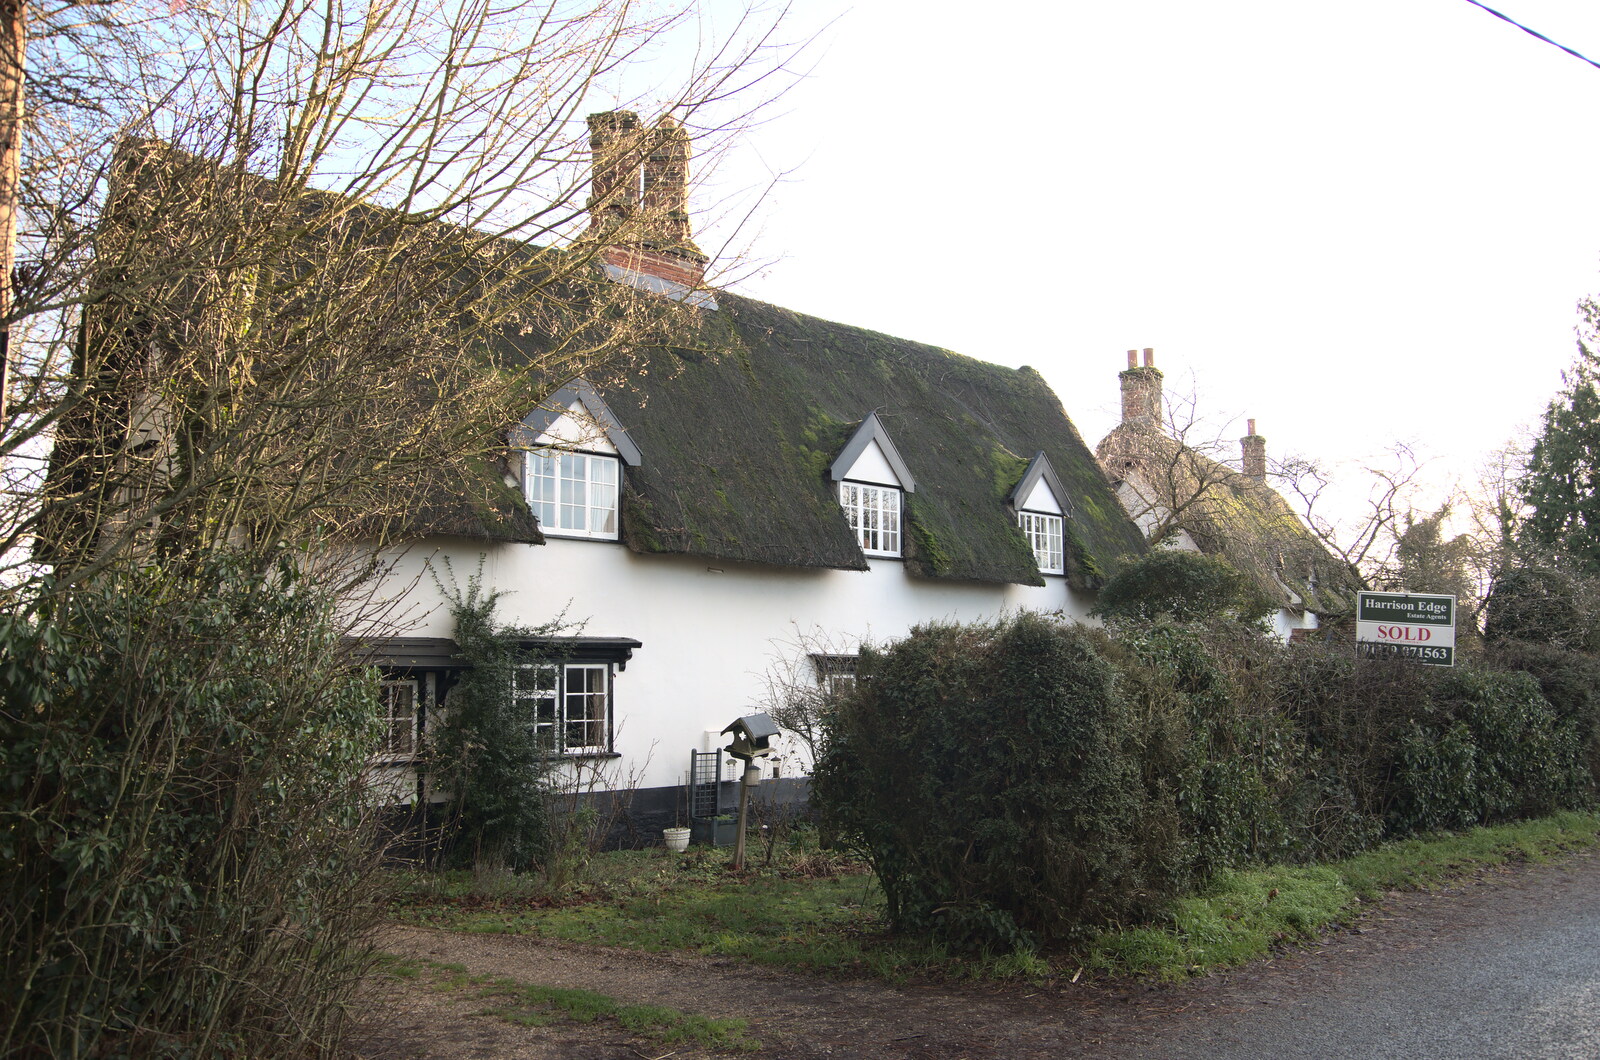 Winter Walks around Brome and Hoxne, Suffolk - 2nd January 2023: Thatched cottages on the edge of Oakley